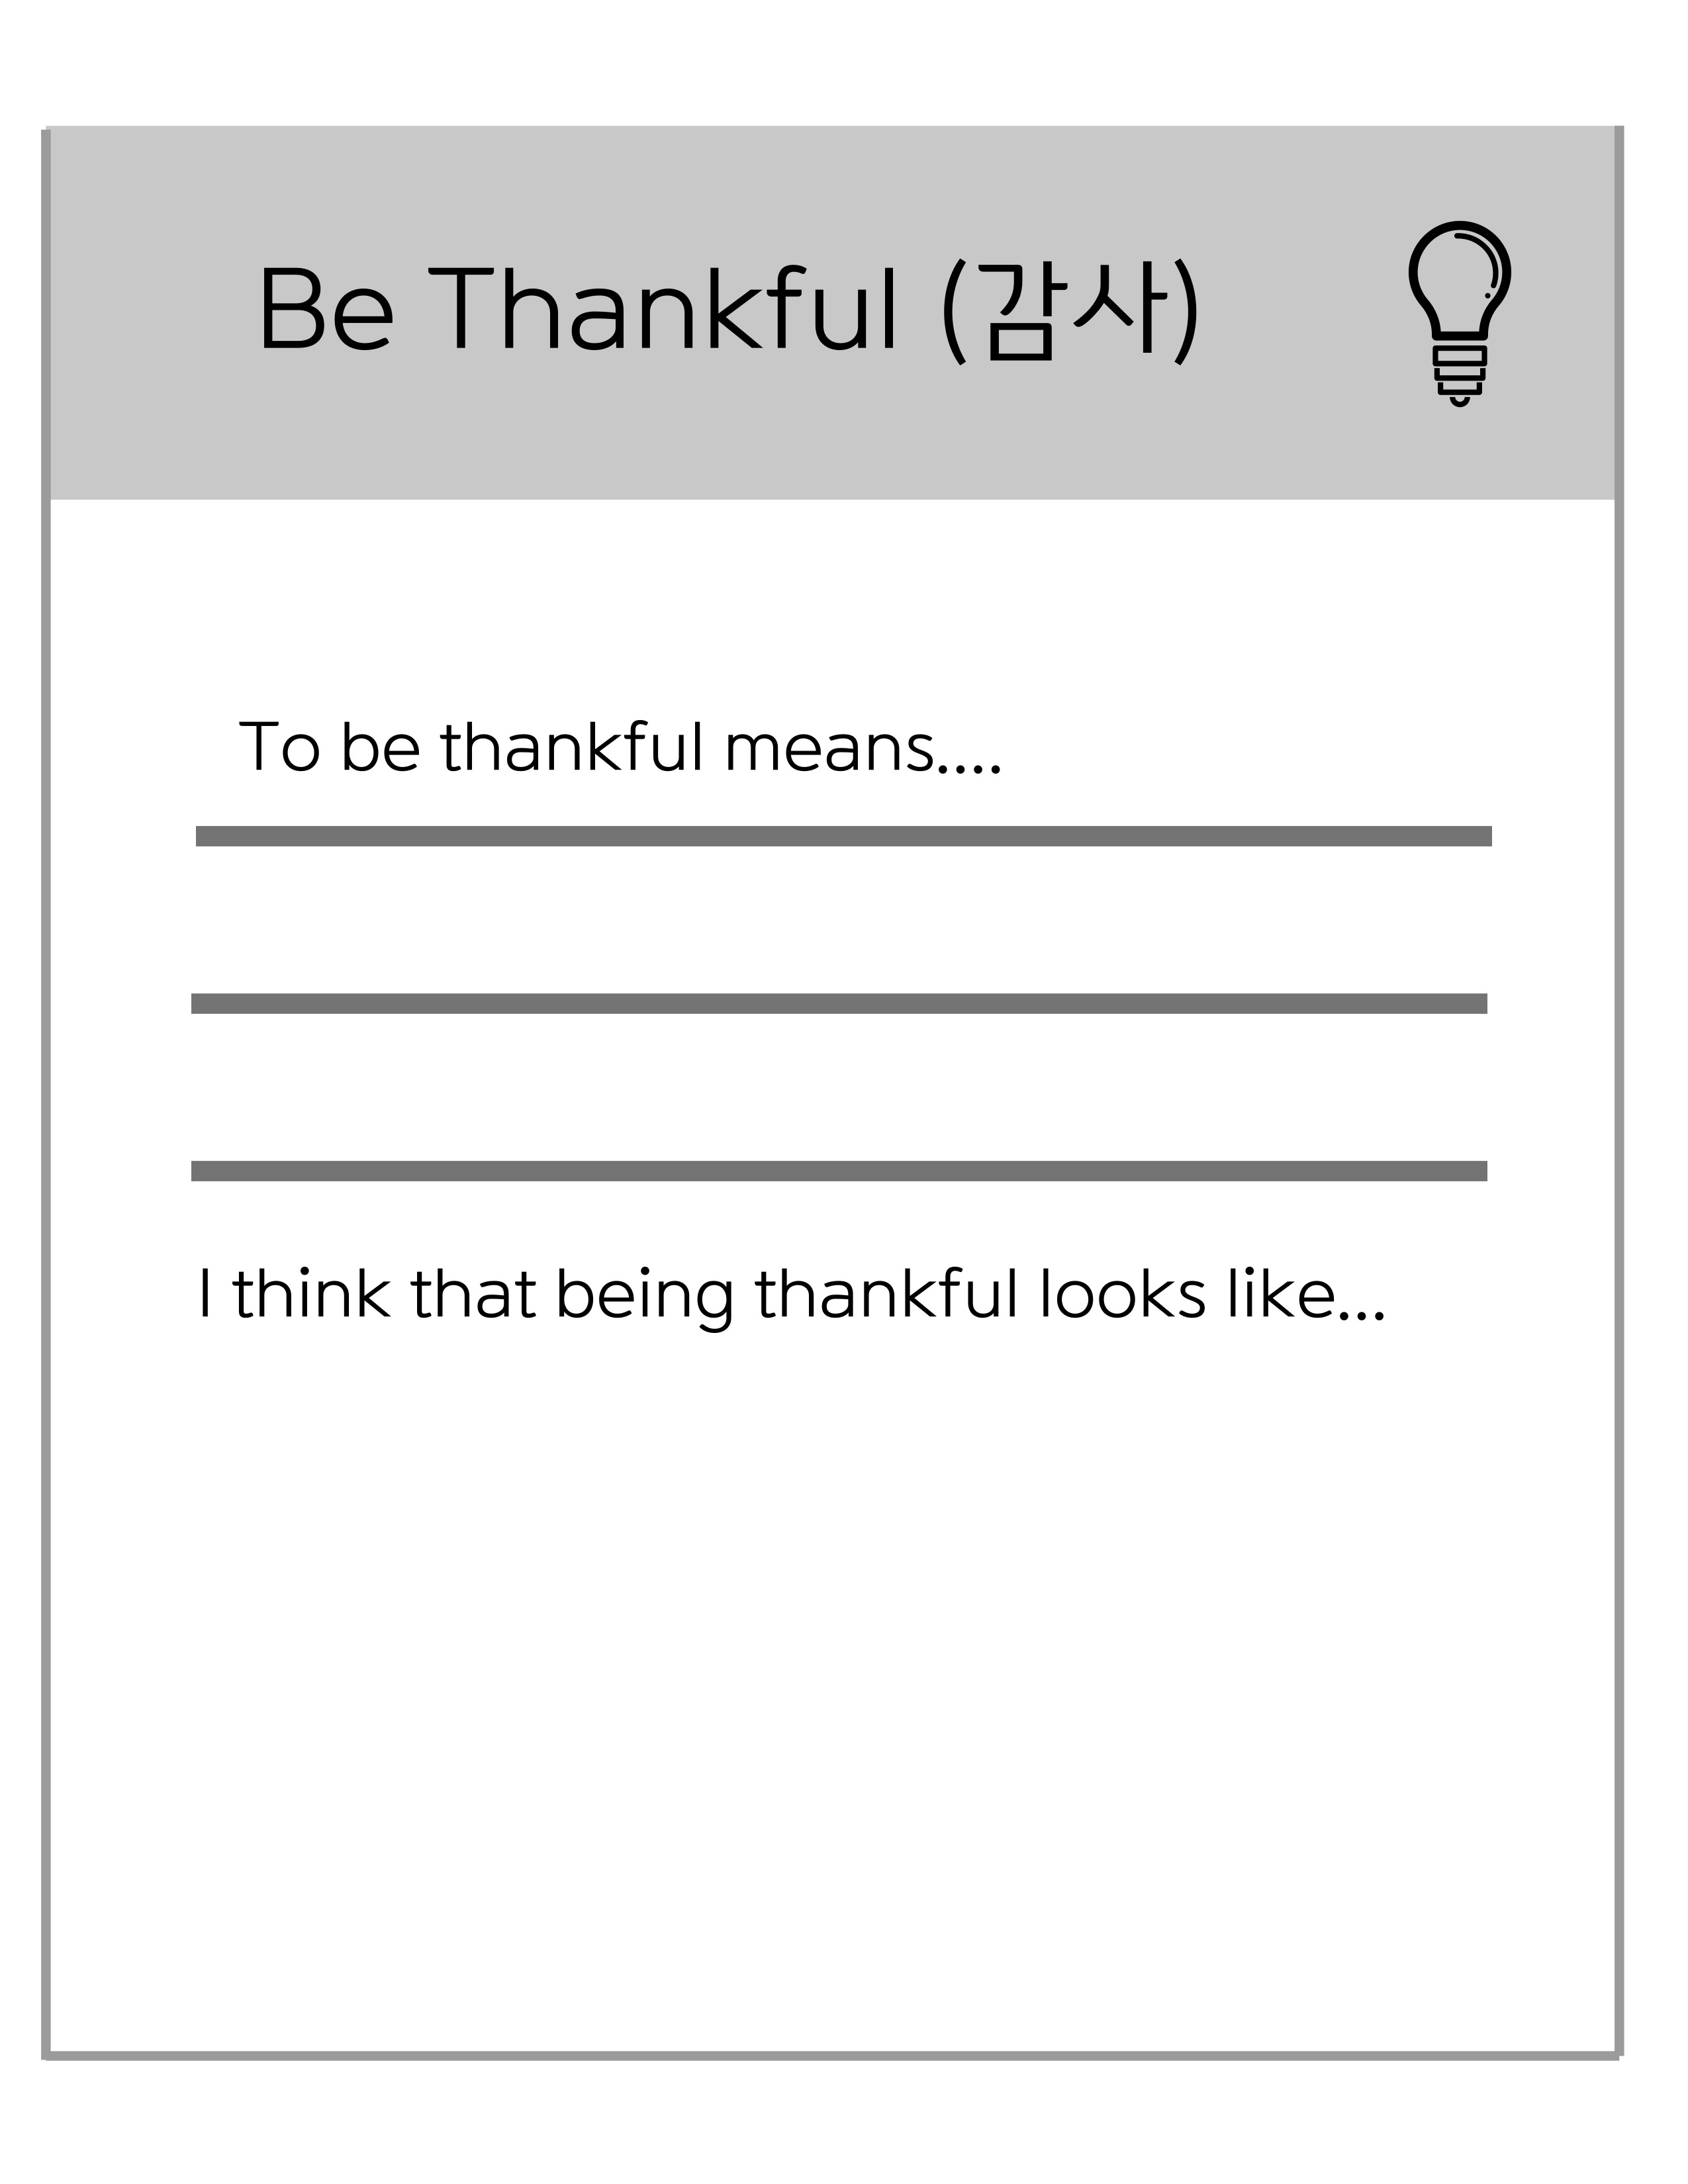 3. What is being thankful.jpg